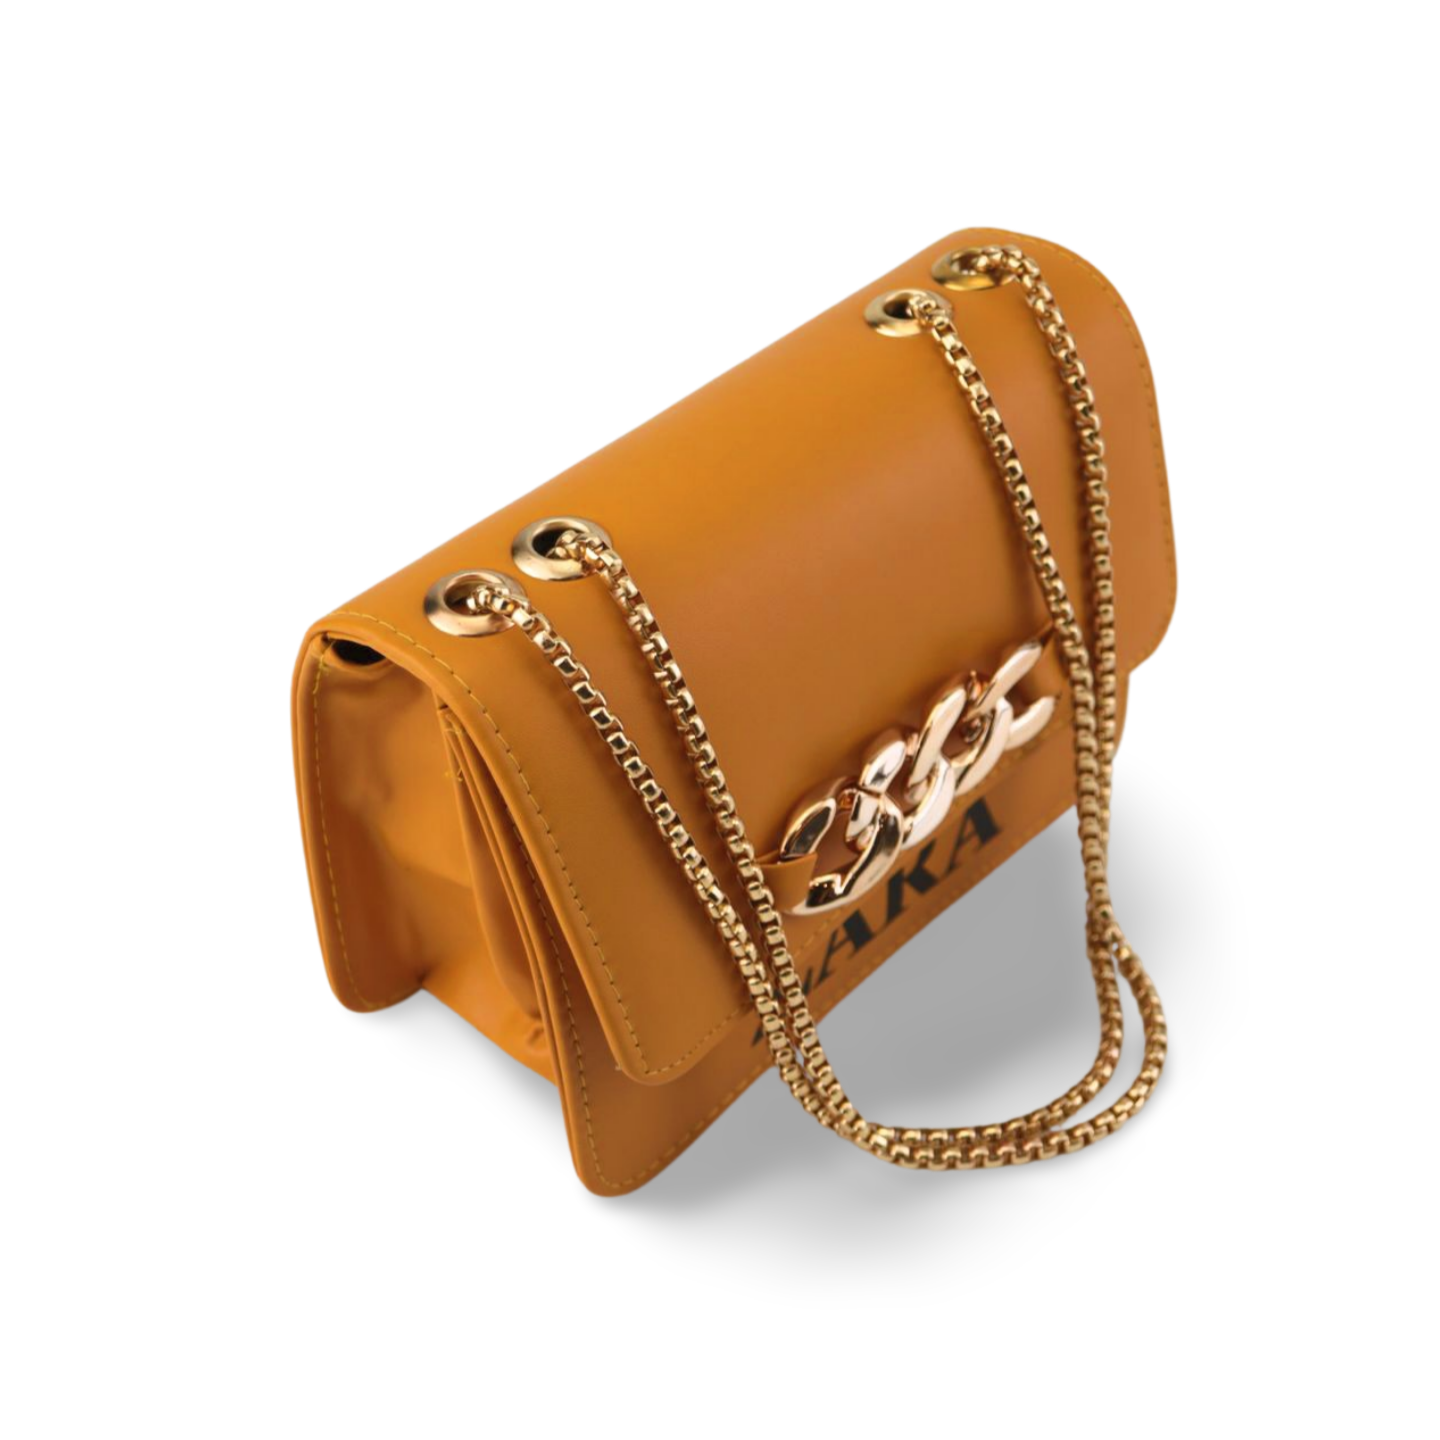 Gold Chain Shoulder Bag with Shoulder Chain - Stylish and Luxurious